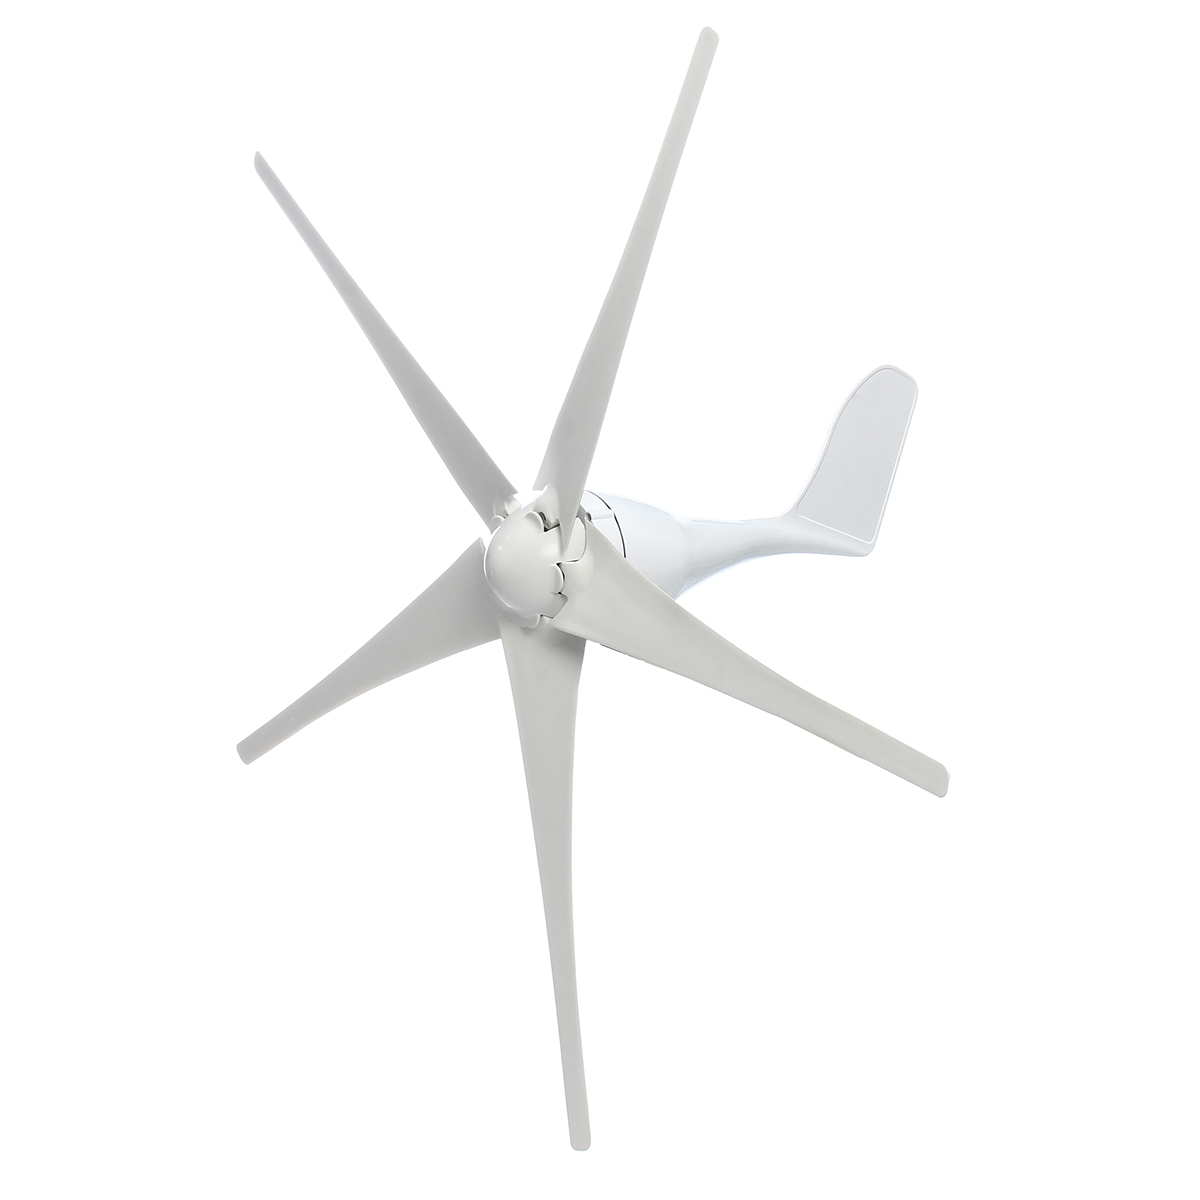 

400W 12V/24V 5 Blades Miniature Wind Turbine Residential Home With Controller Mini Wind Generator